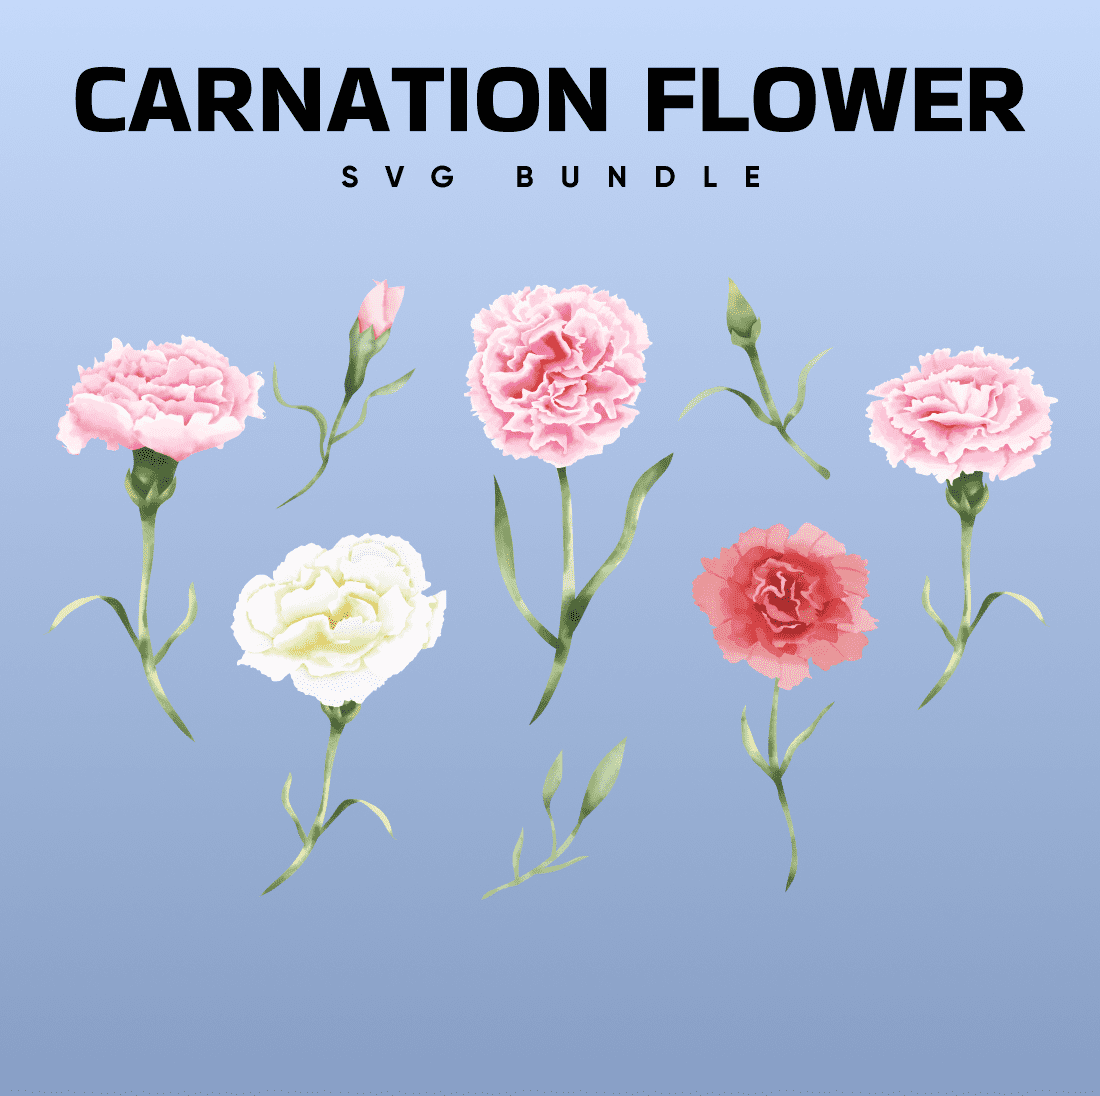 Realistic carnations are drawn on a blue background.